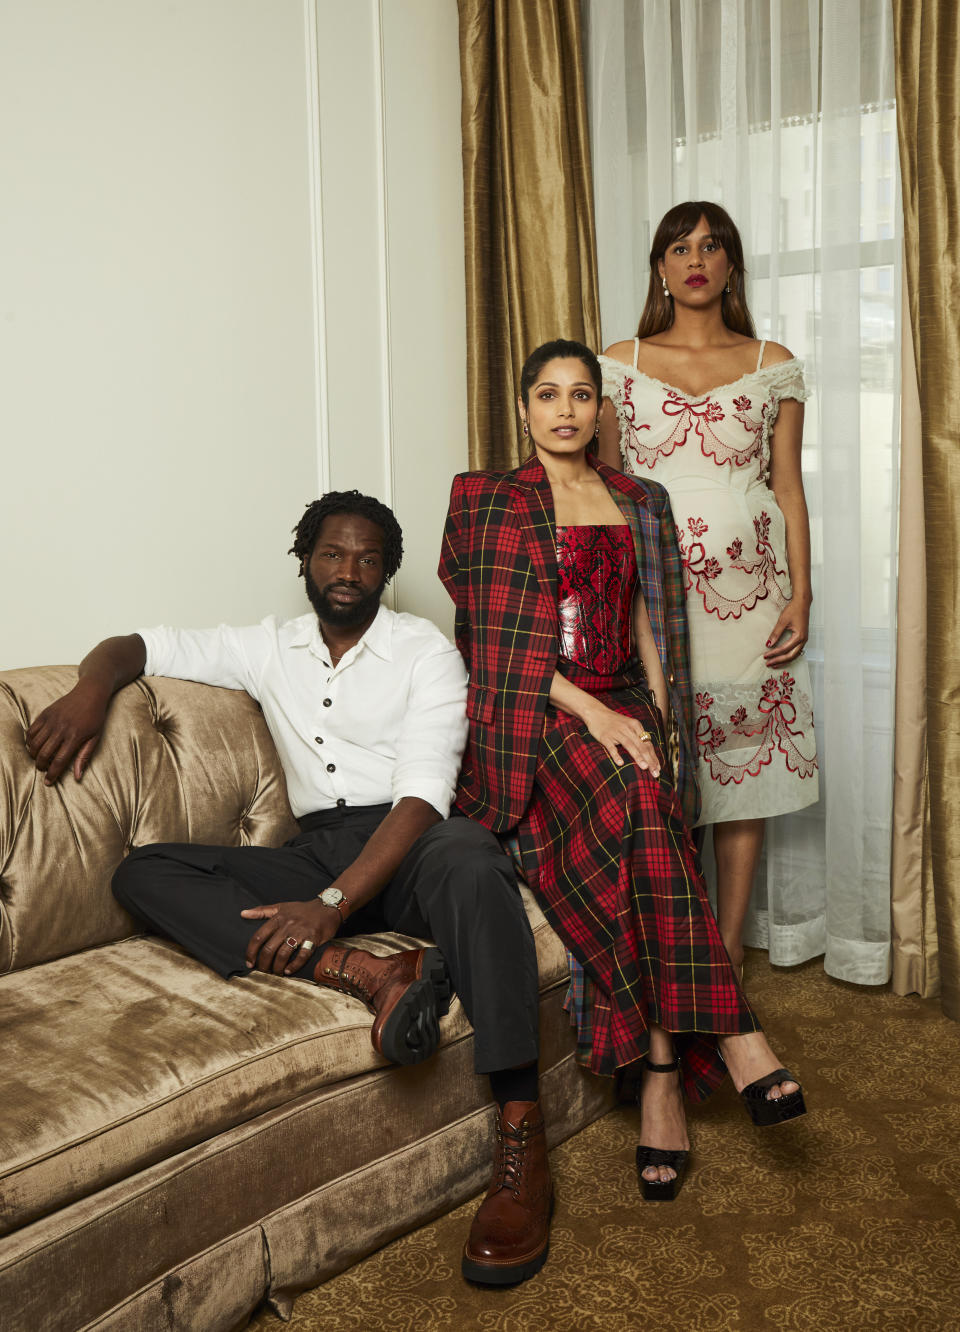 Sope Dirisu, from left, Freida Pinto and Zawe Ashton pose for a portrait to promote "Mr. Malcolm's List" on Tuesday, June 28, 2022 in New York. (Photo by Matt Licari/Invision/AP)